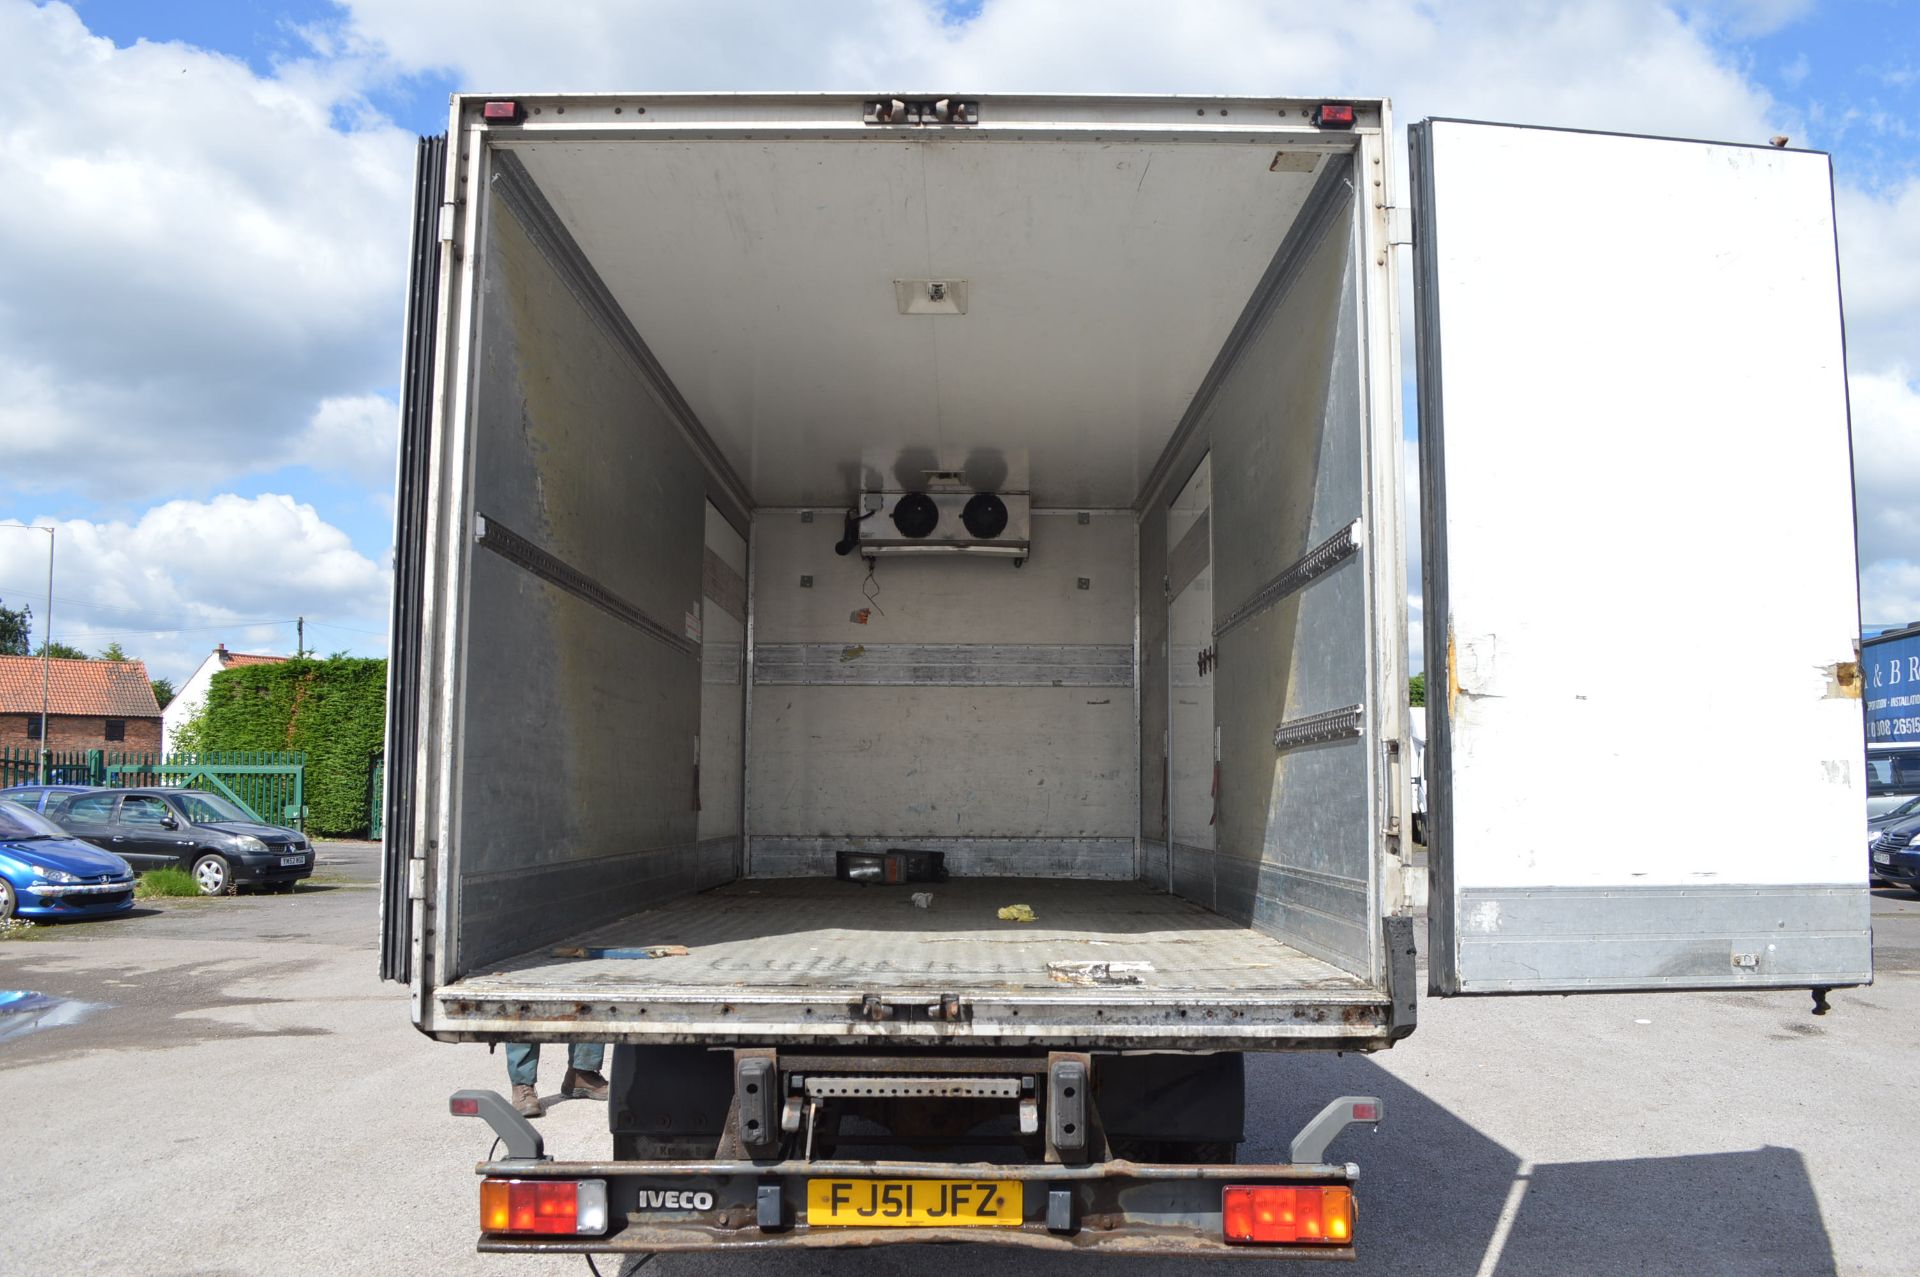 2001/51 REG IVECO-FORD CARGO TECTOR 75E17 REFRIGERATED LORRY - Image 11 of 19